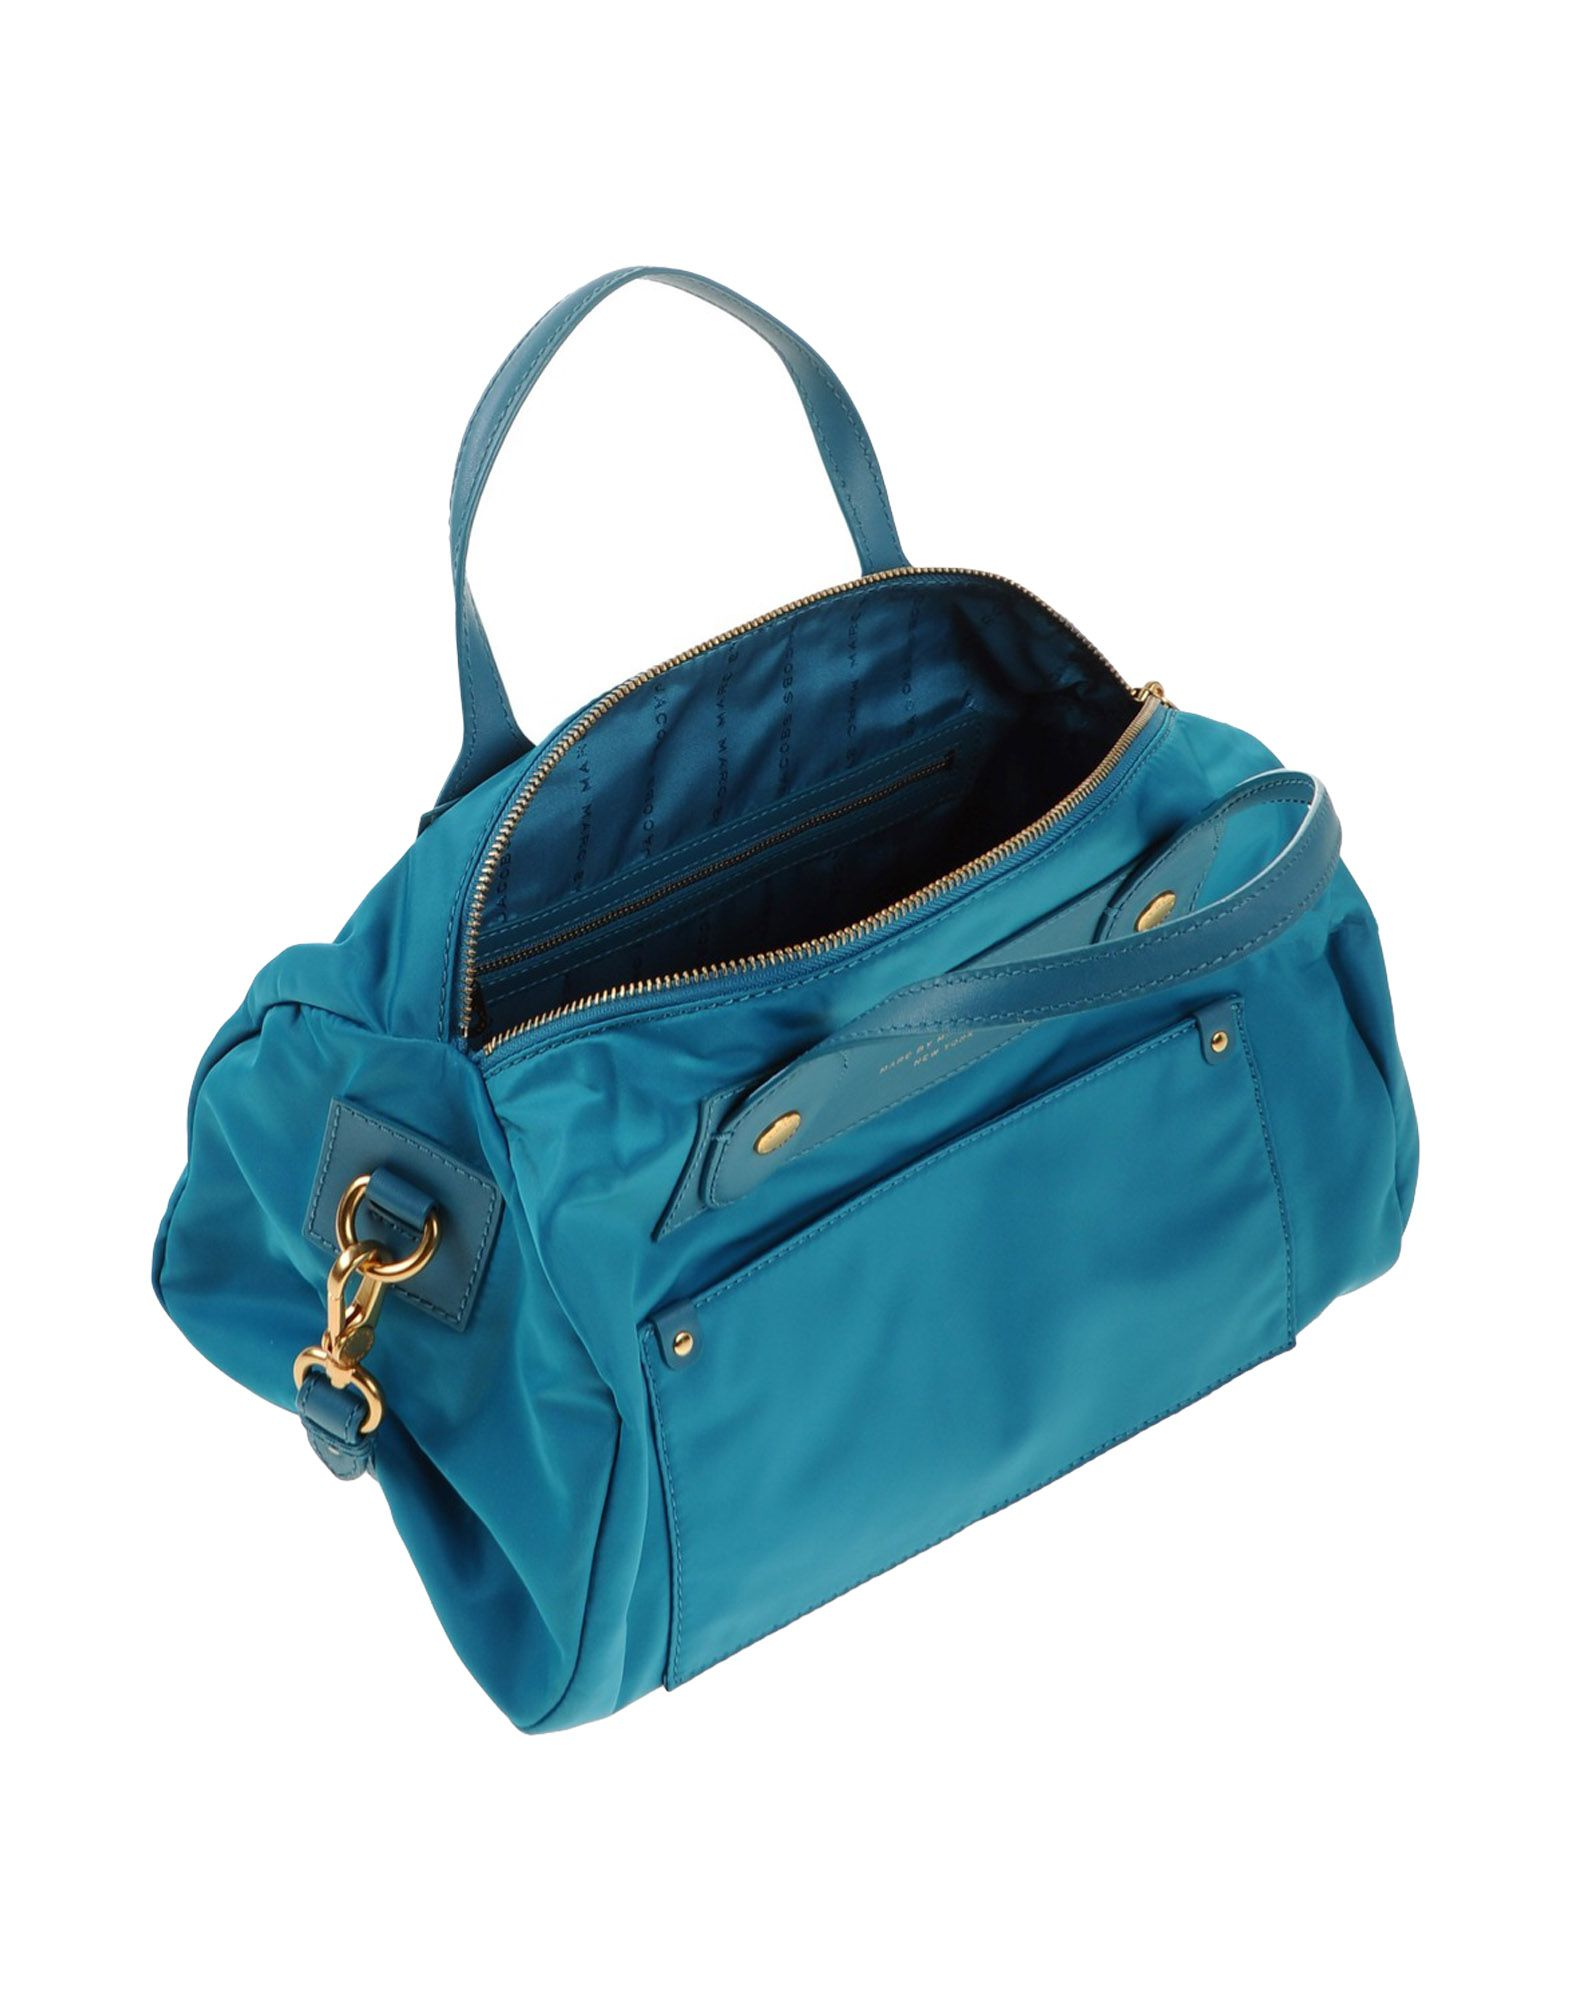 Marc By Marc Jacobs Synthetic Handbag in Turquoise (Blue) - Lyst